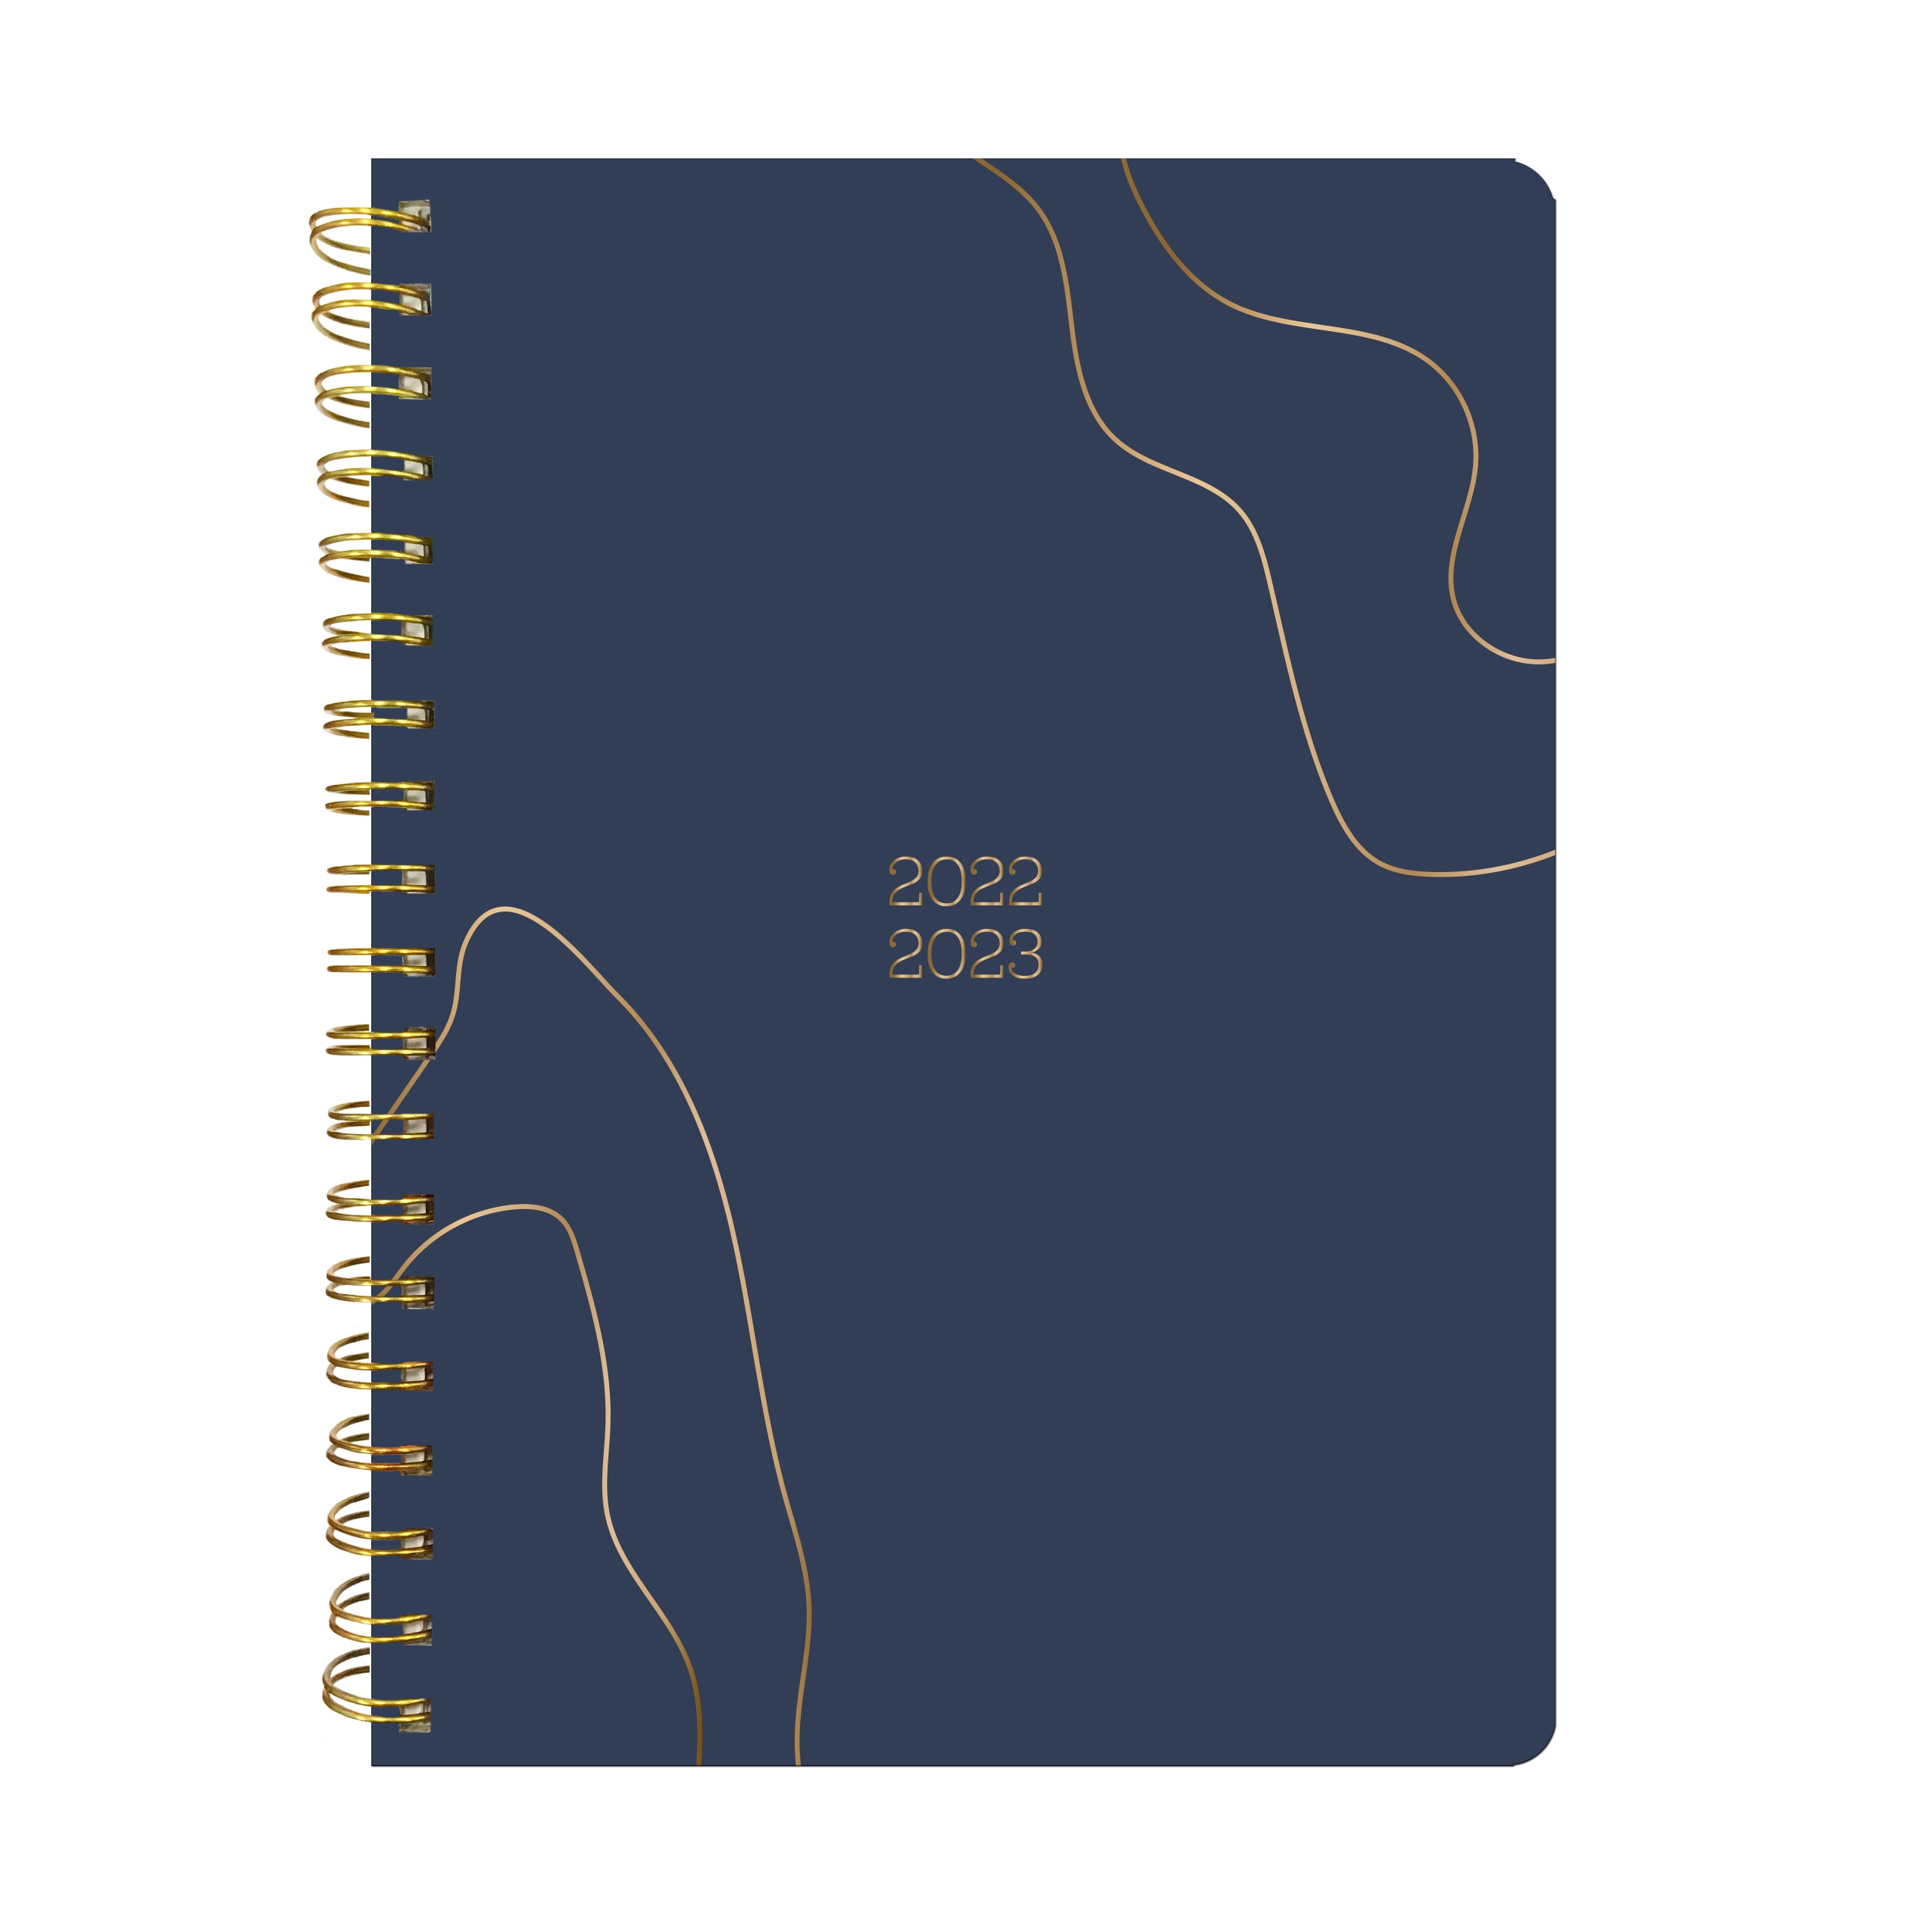 2022 - 2023 Large Delux Blue Planner,  Paper cover twin-ring spiral planner with mylar tab dividers